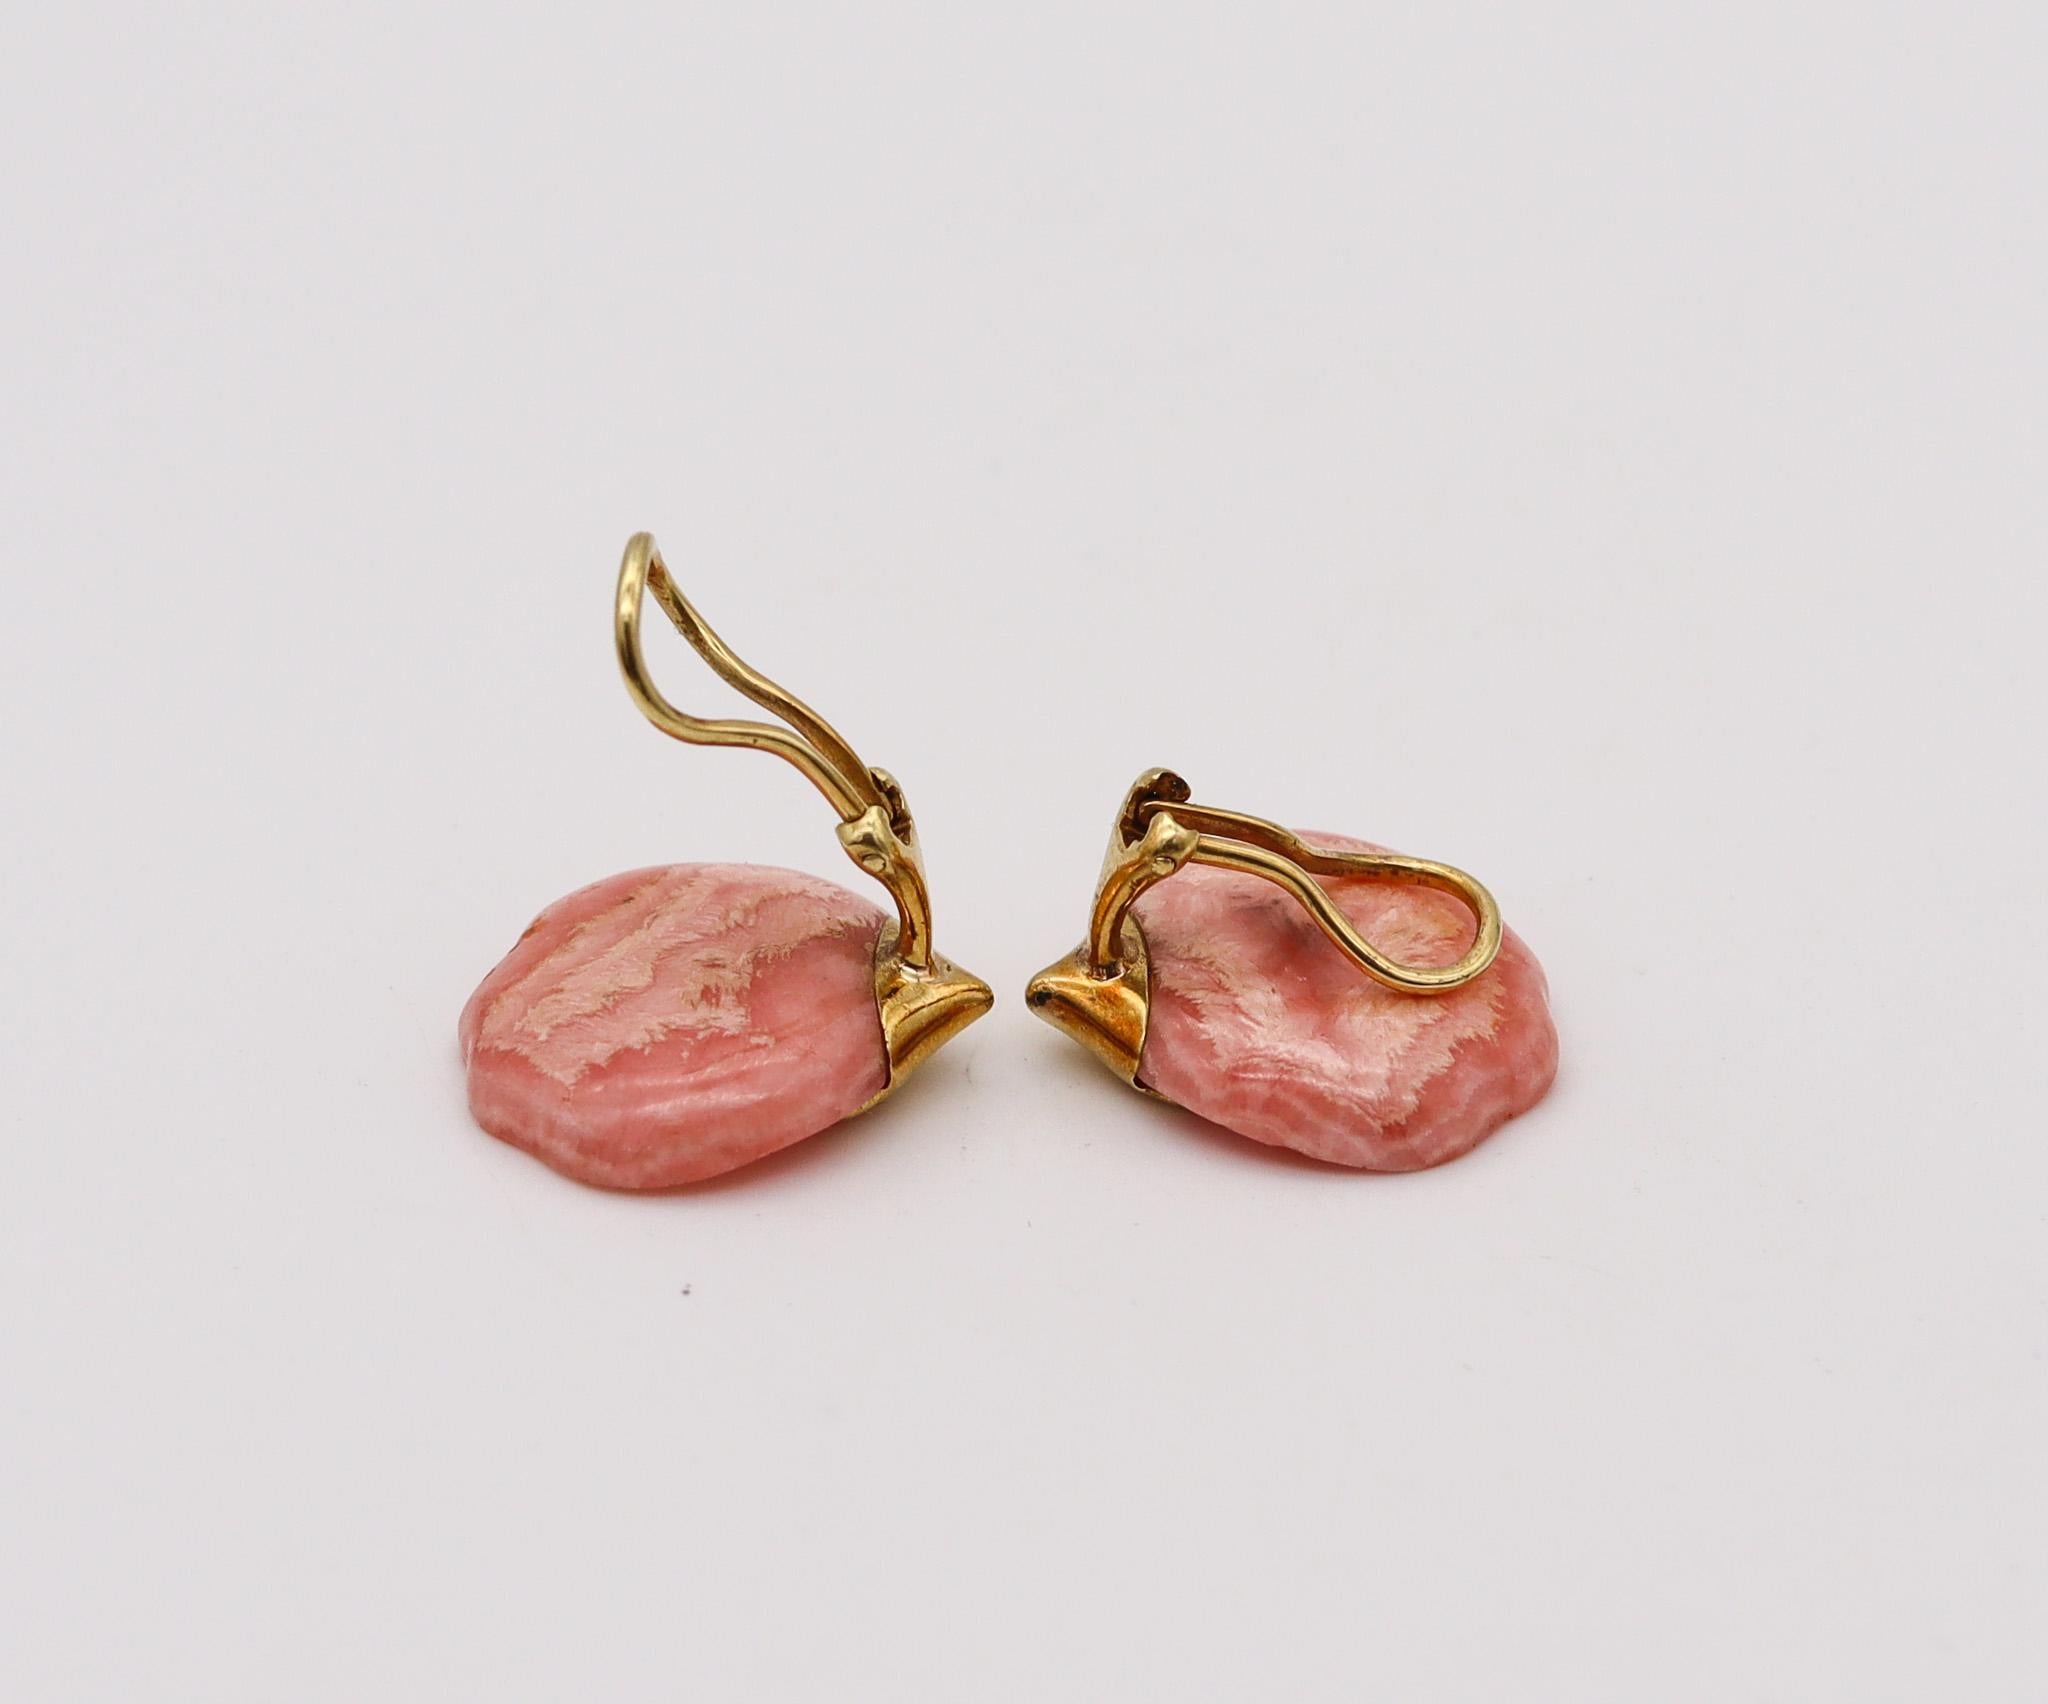 Modernist Tiffany & Co. 1977 Angela Cummings Petals Earrings In 18Kt Gold With Pink Agate For Sale